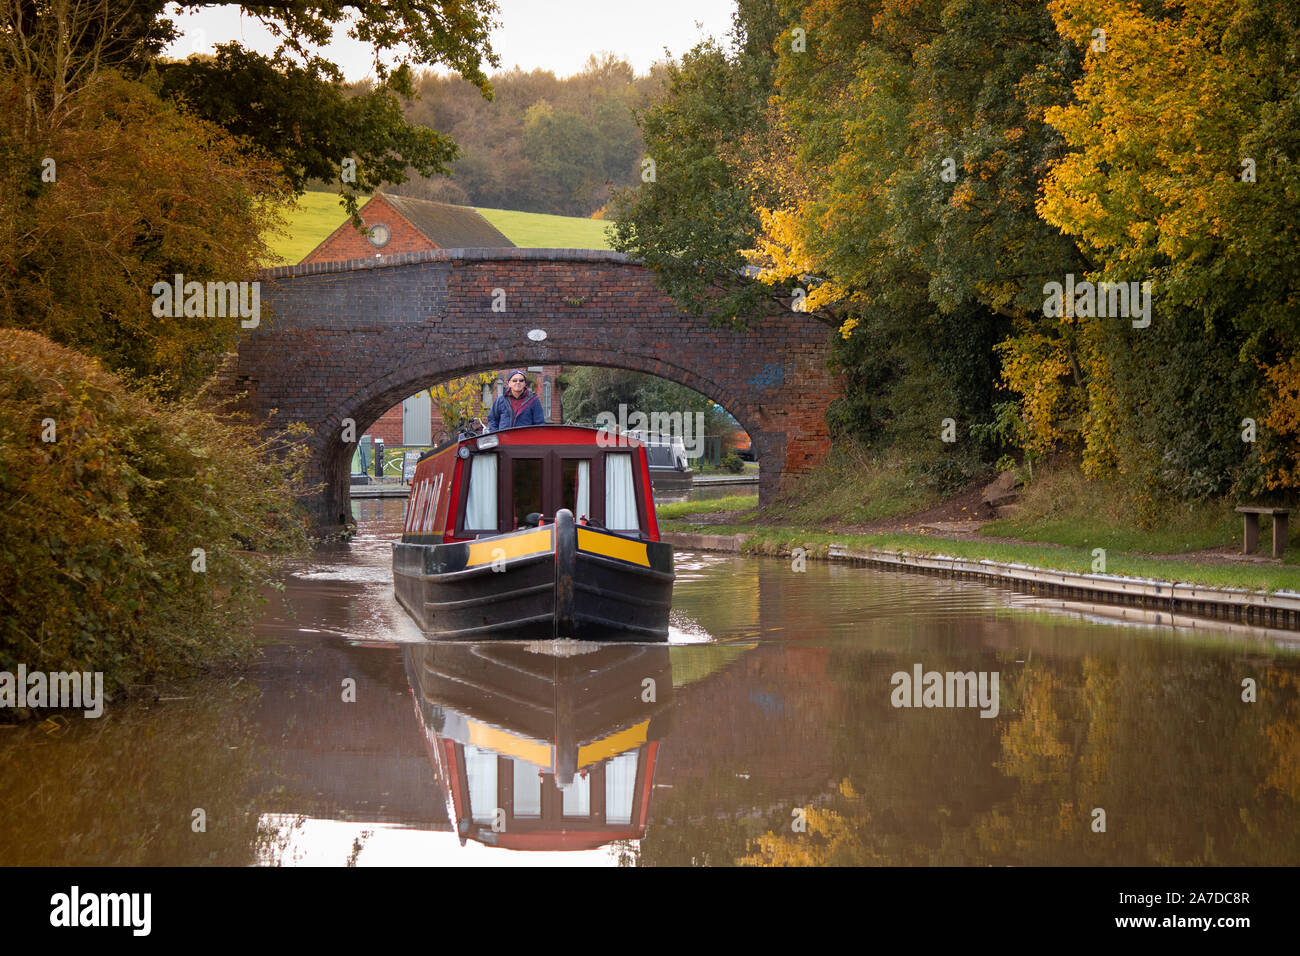 A canal boat makes it's way along the Coventry canal near Nuneaton. Stock Photo